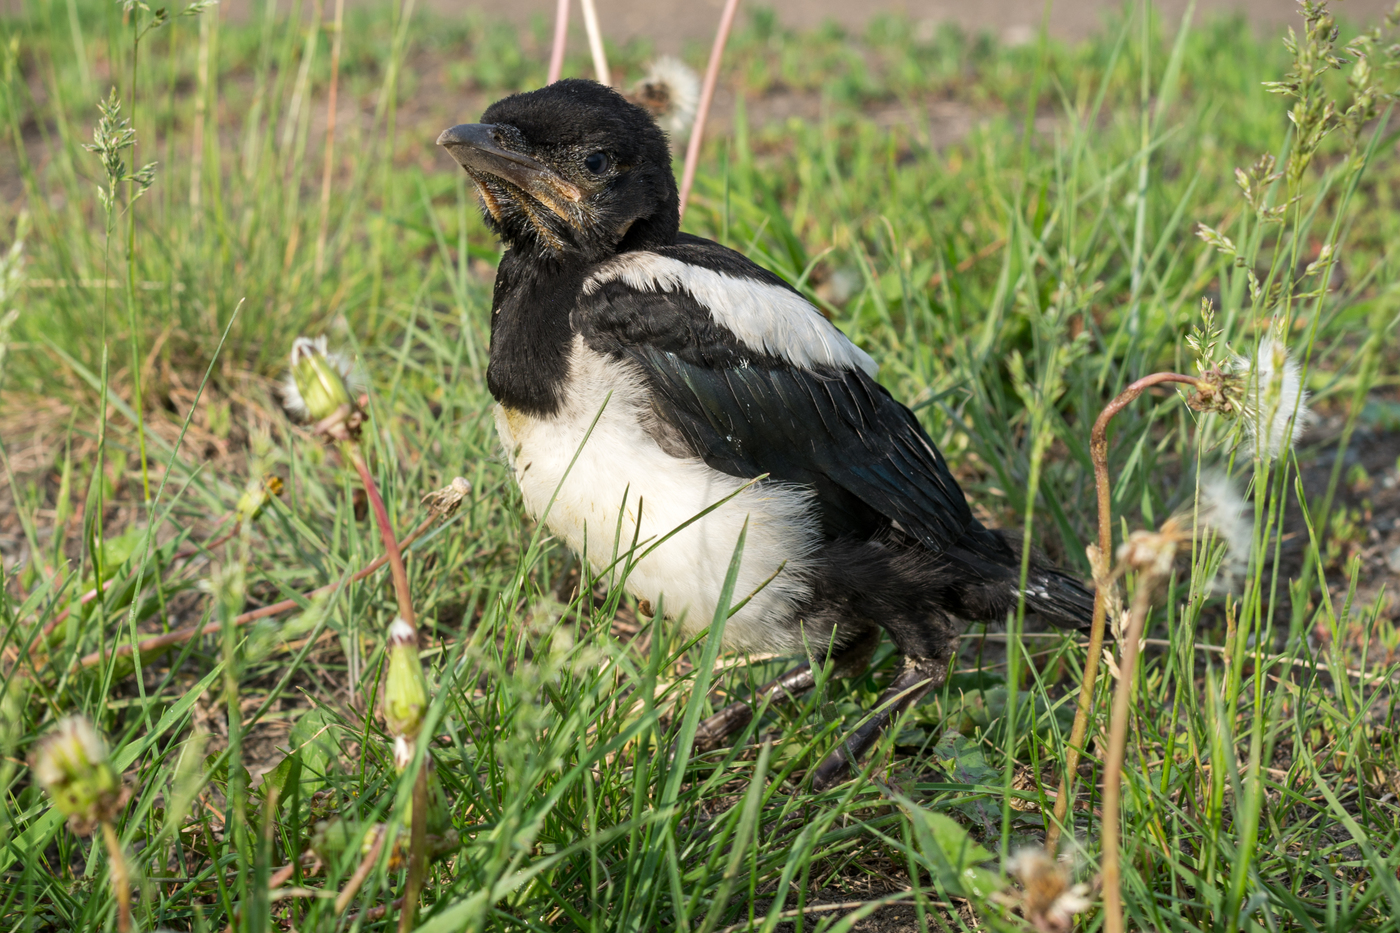 I-Magpie chick